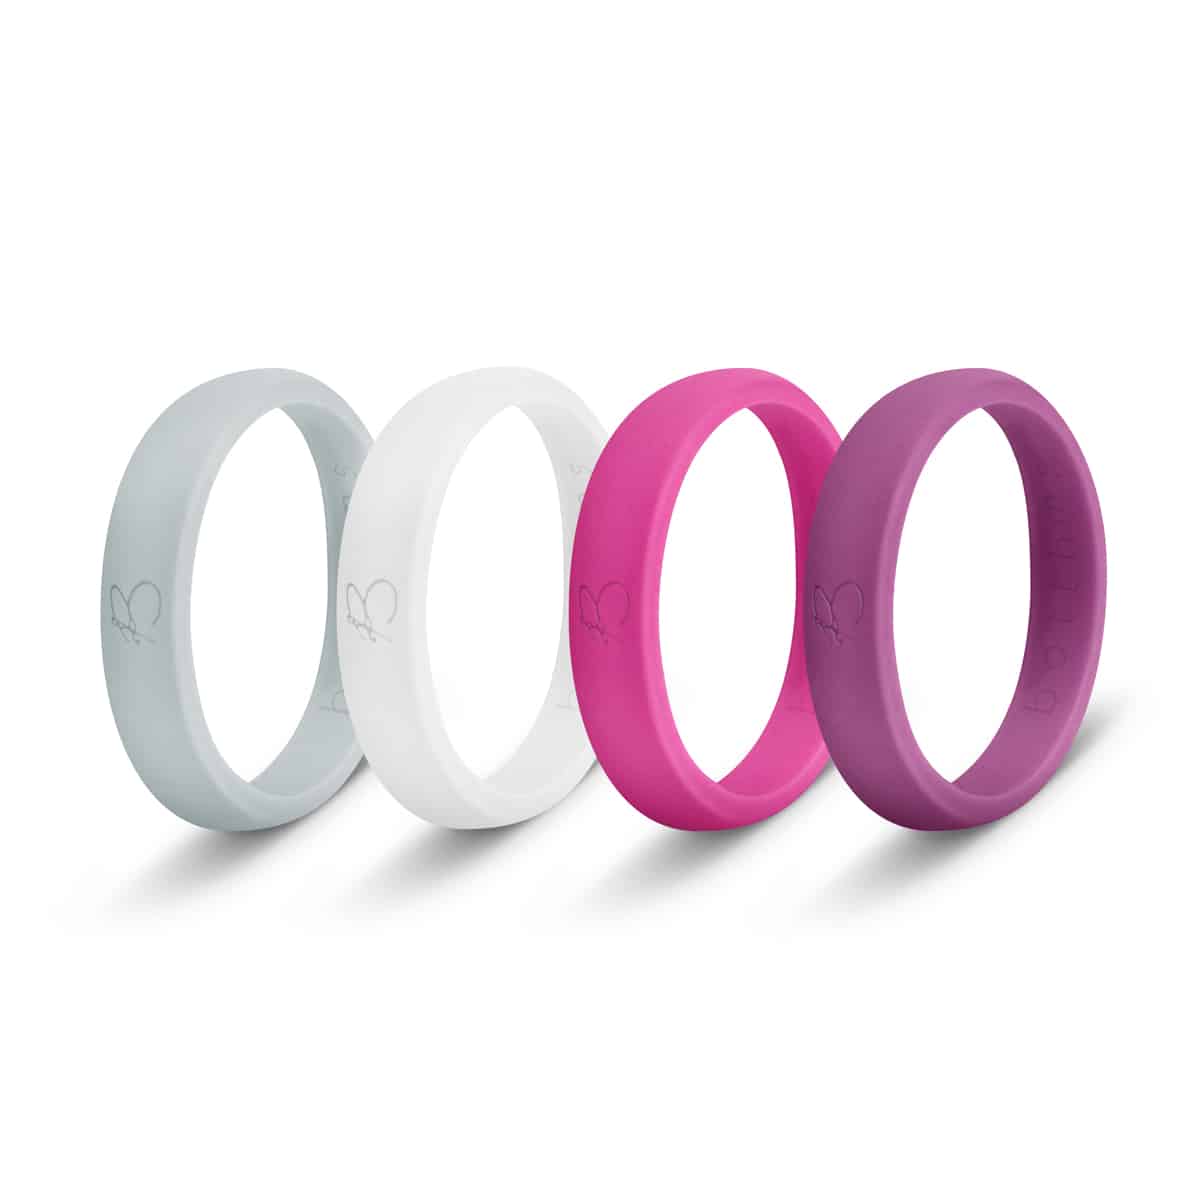 products/BTTHMS_RINGS_W_OCT19__0000_GWPP.jpgproducts/BTTHMS_RINGS__BOX_4_W_OCT19__0000_GWPP.jpg